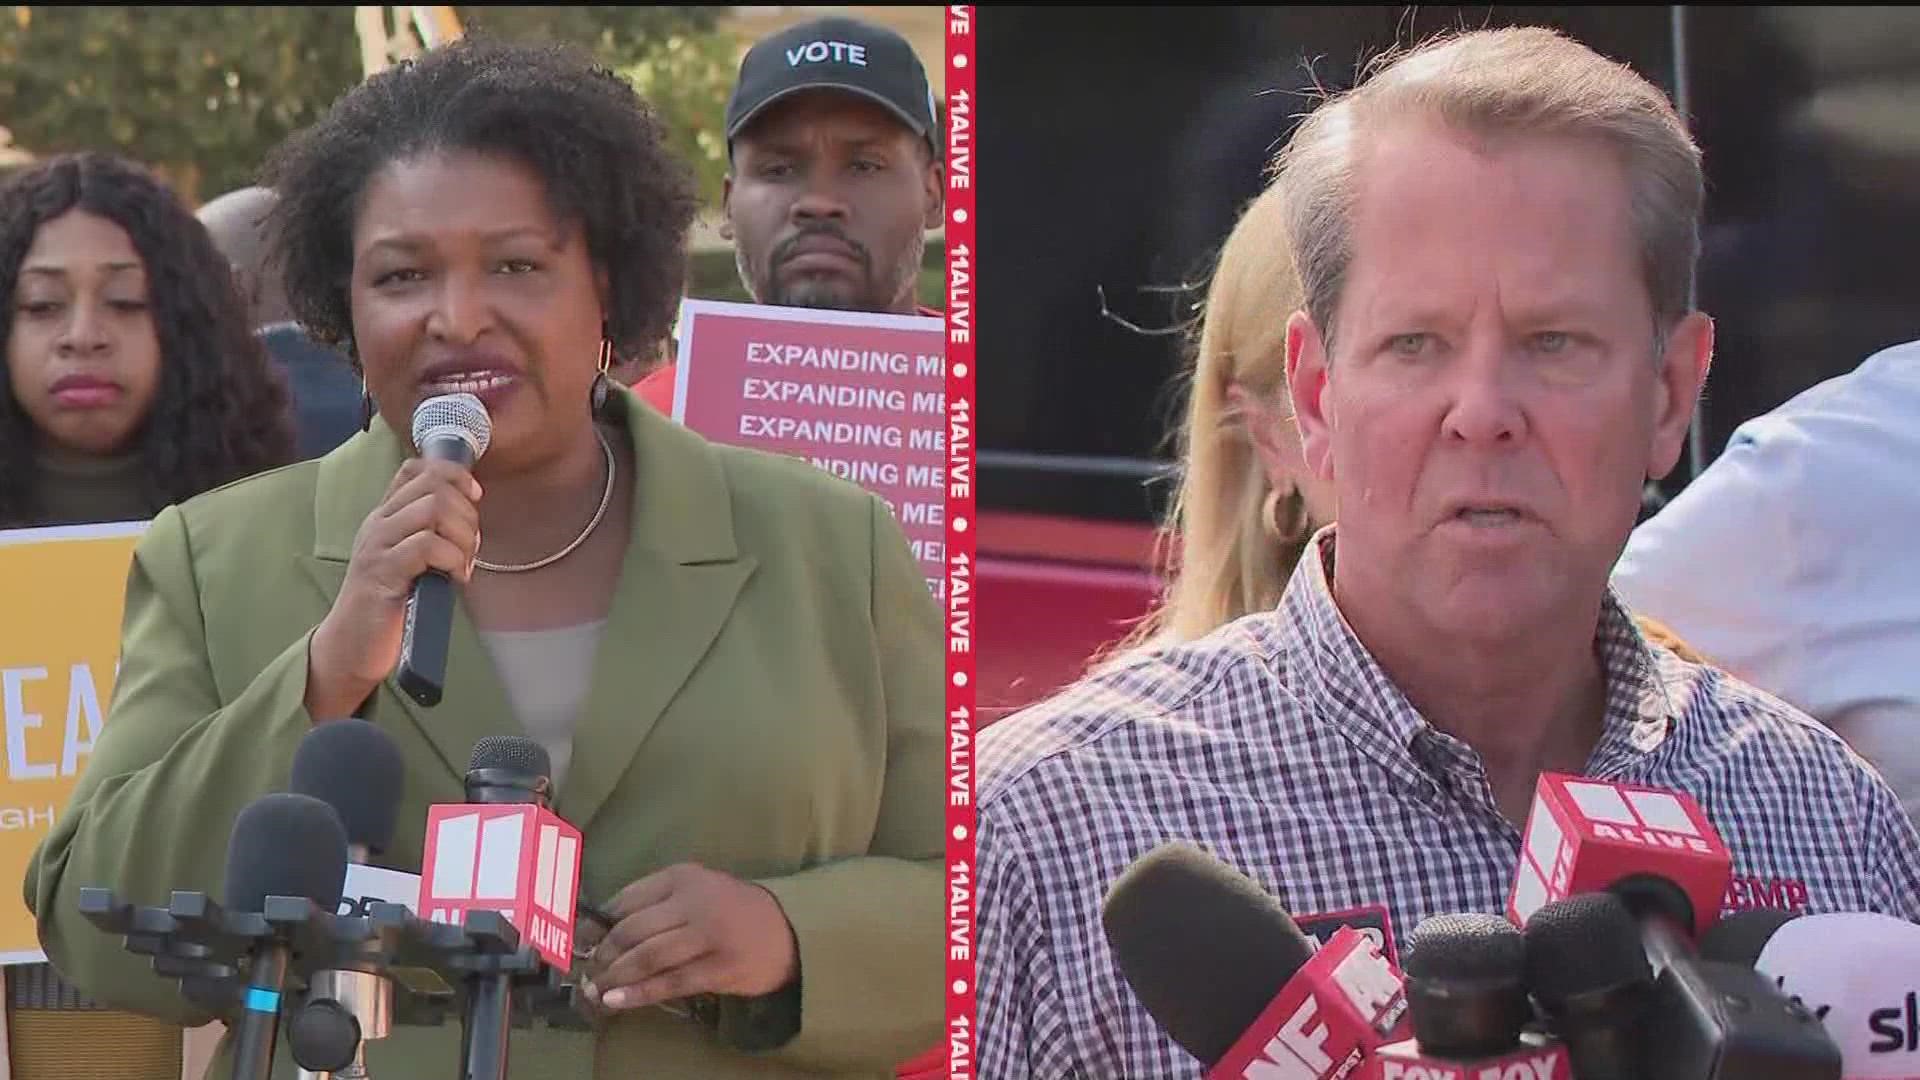 Here's how the Kemp-Abrams and Walker-Warnock races are breaking down beyond the numbers.